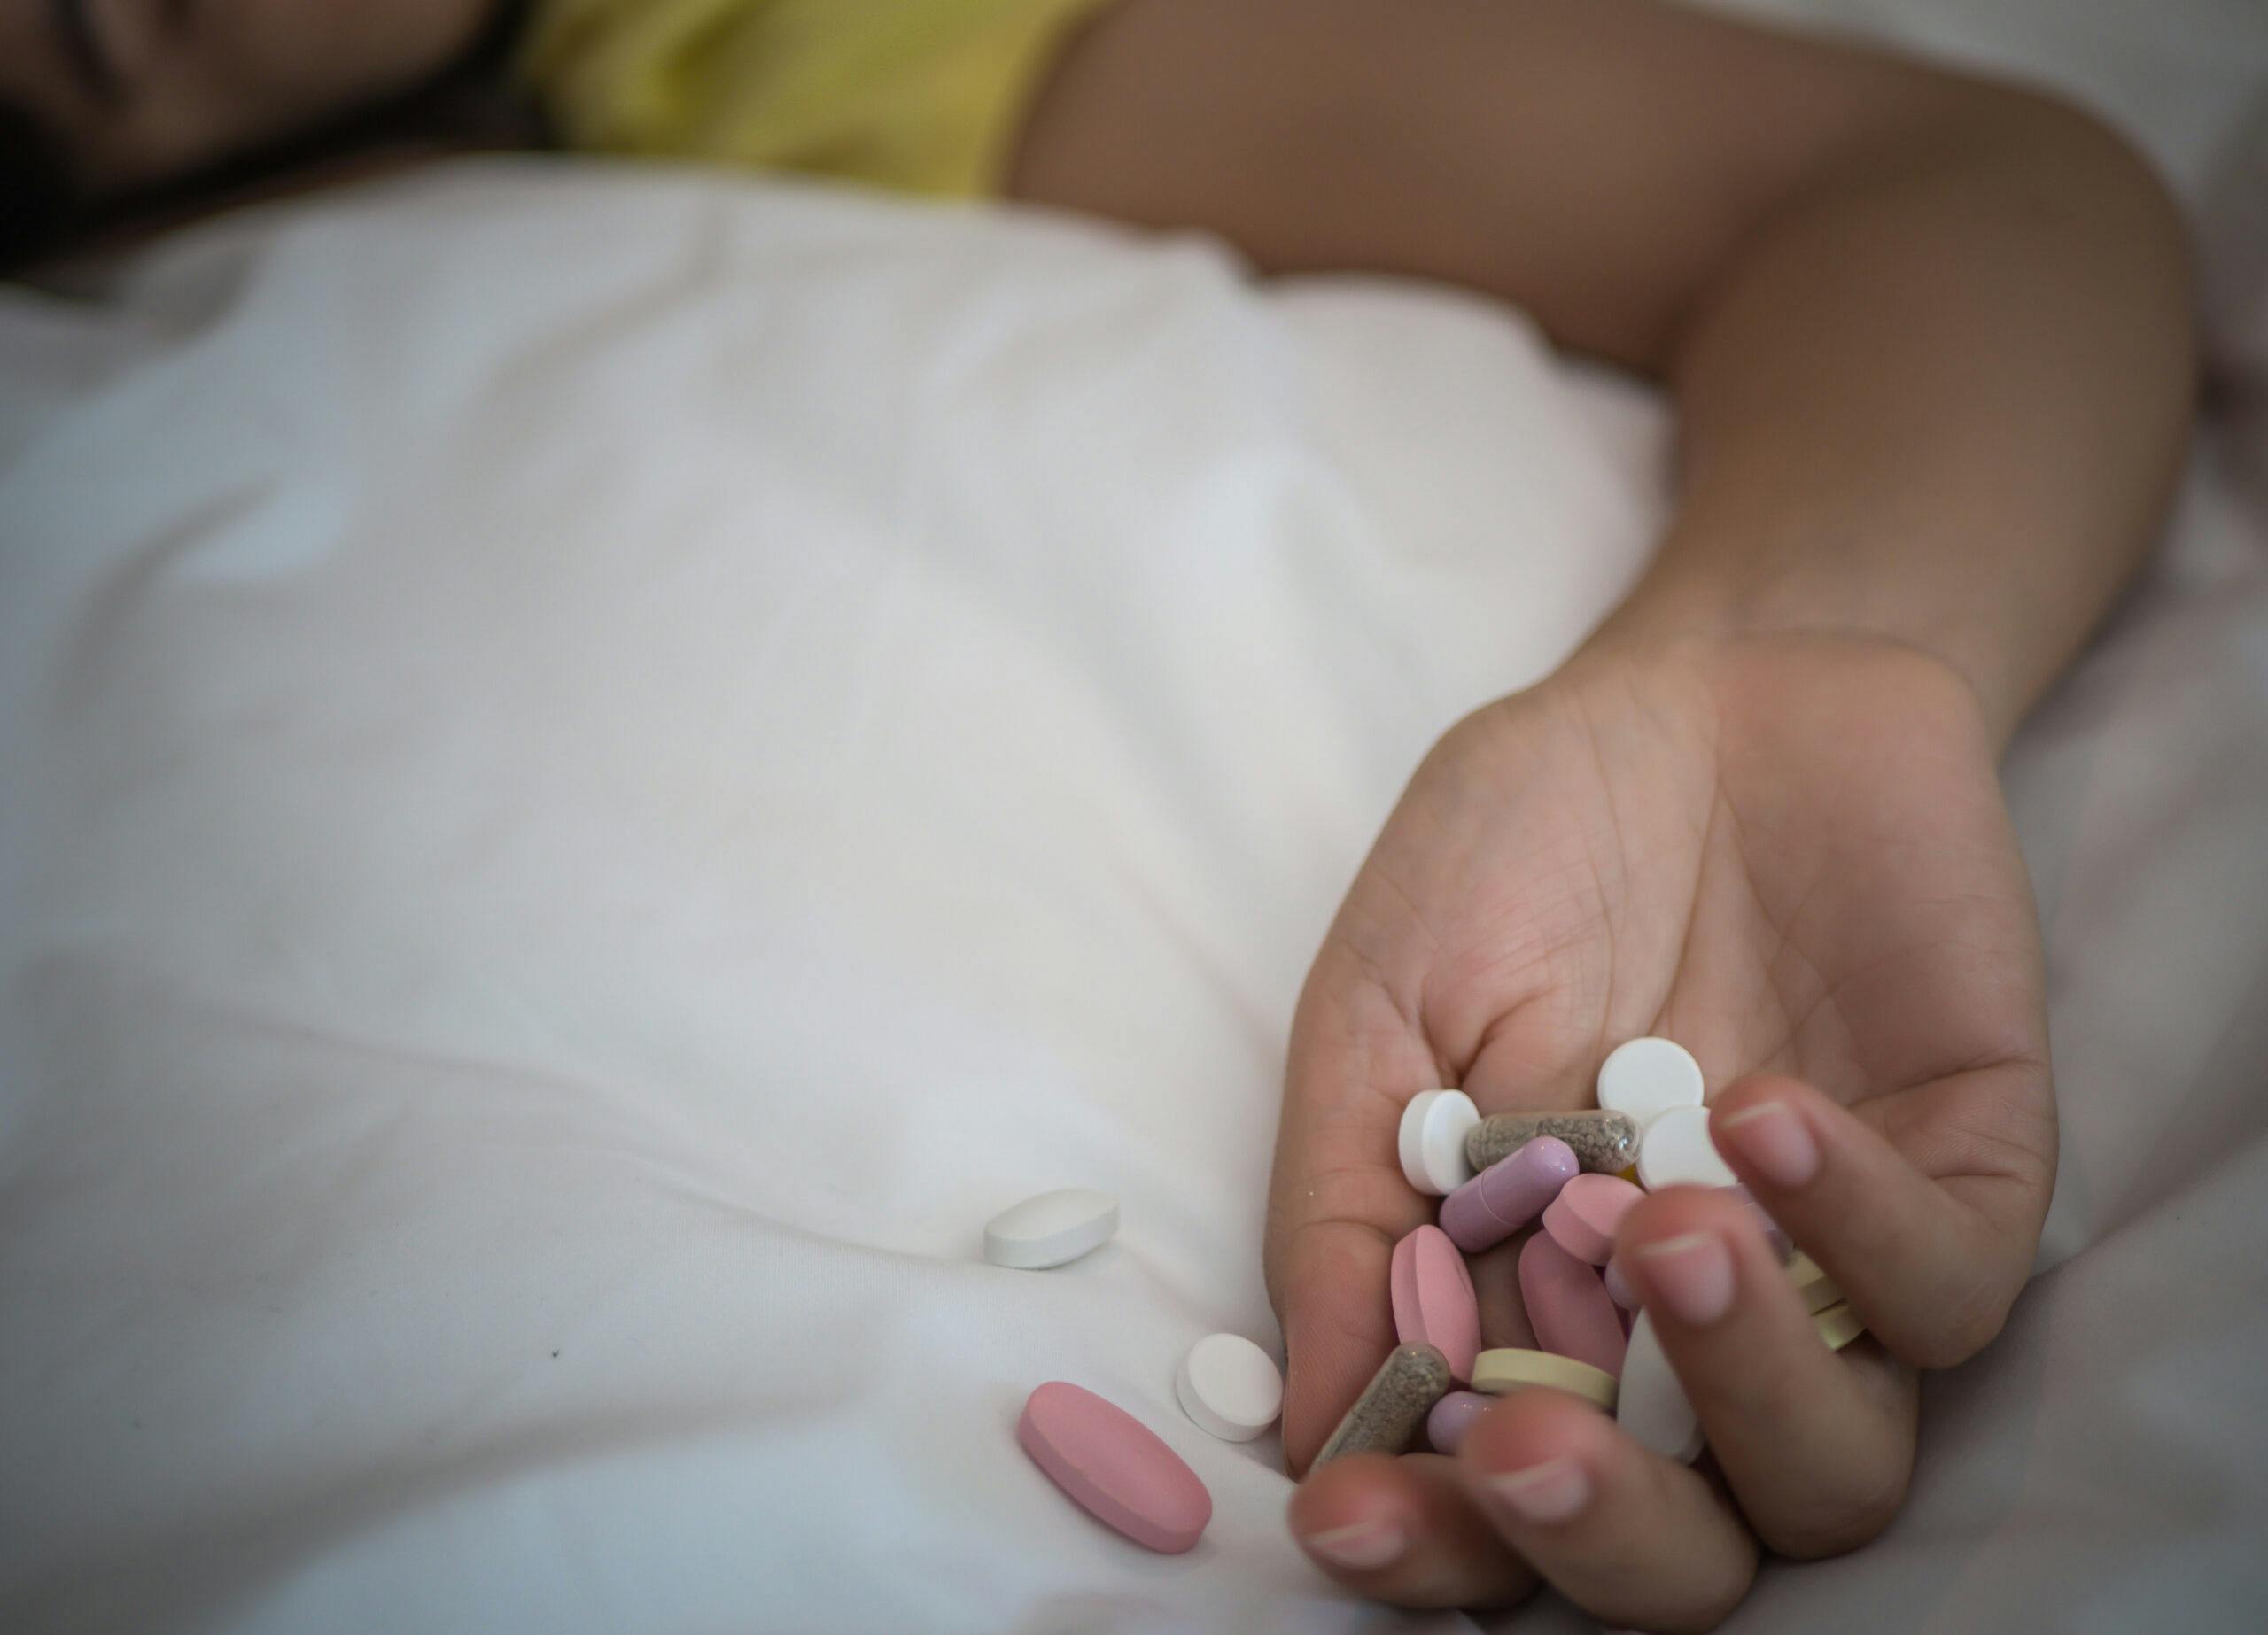 woman lying on bed with pills in hand overdose